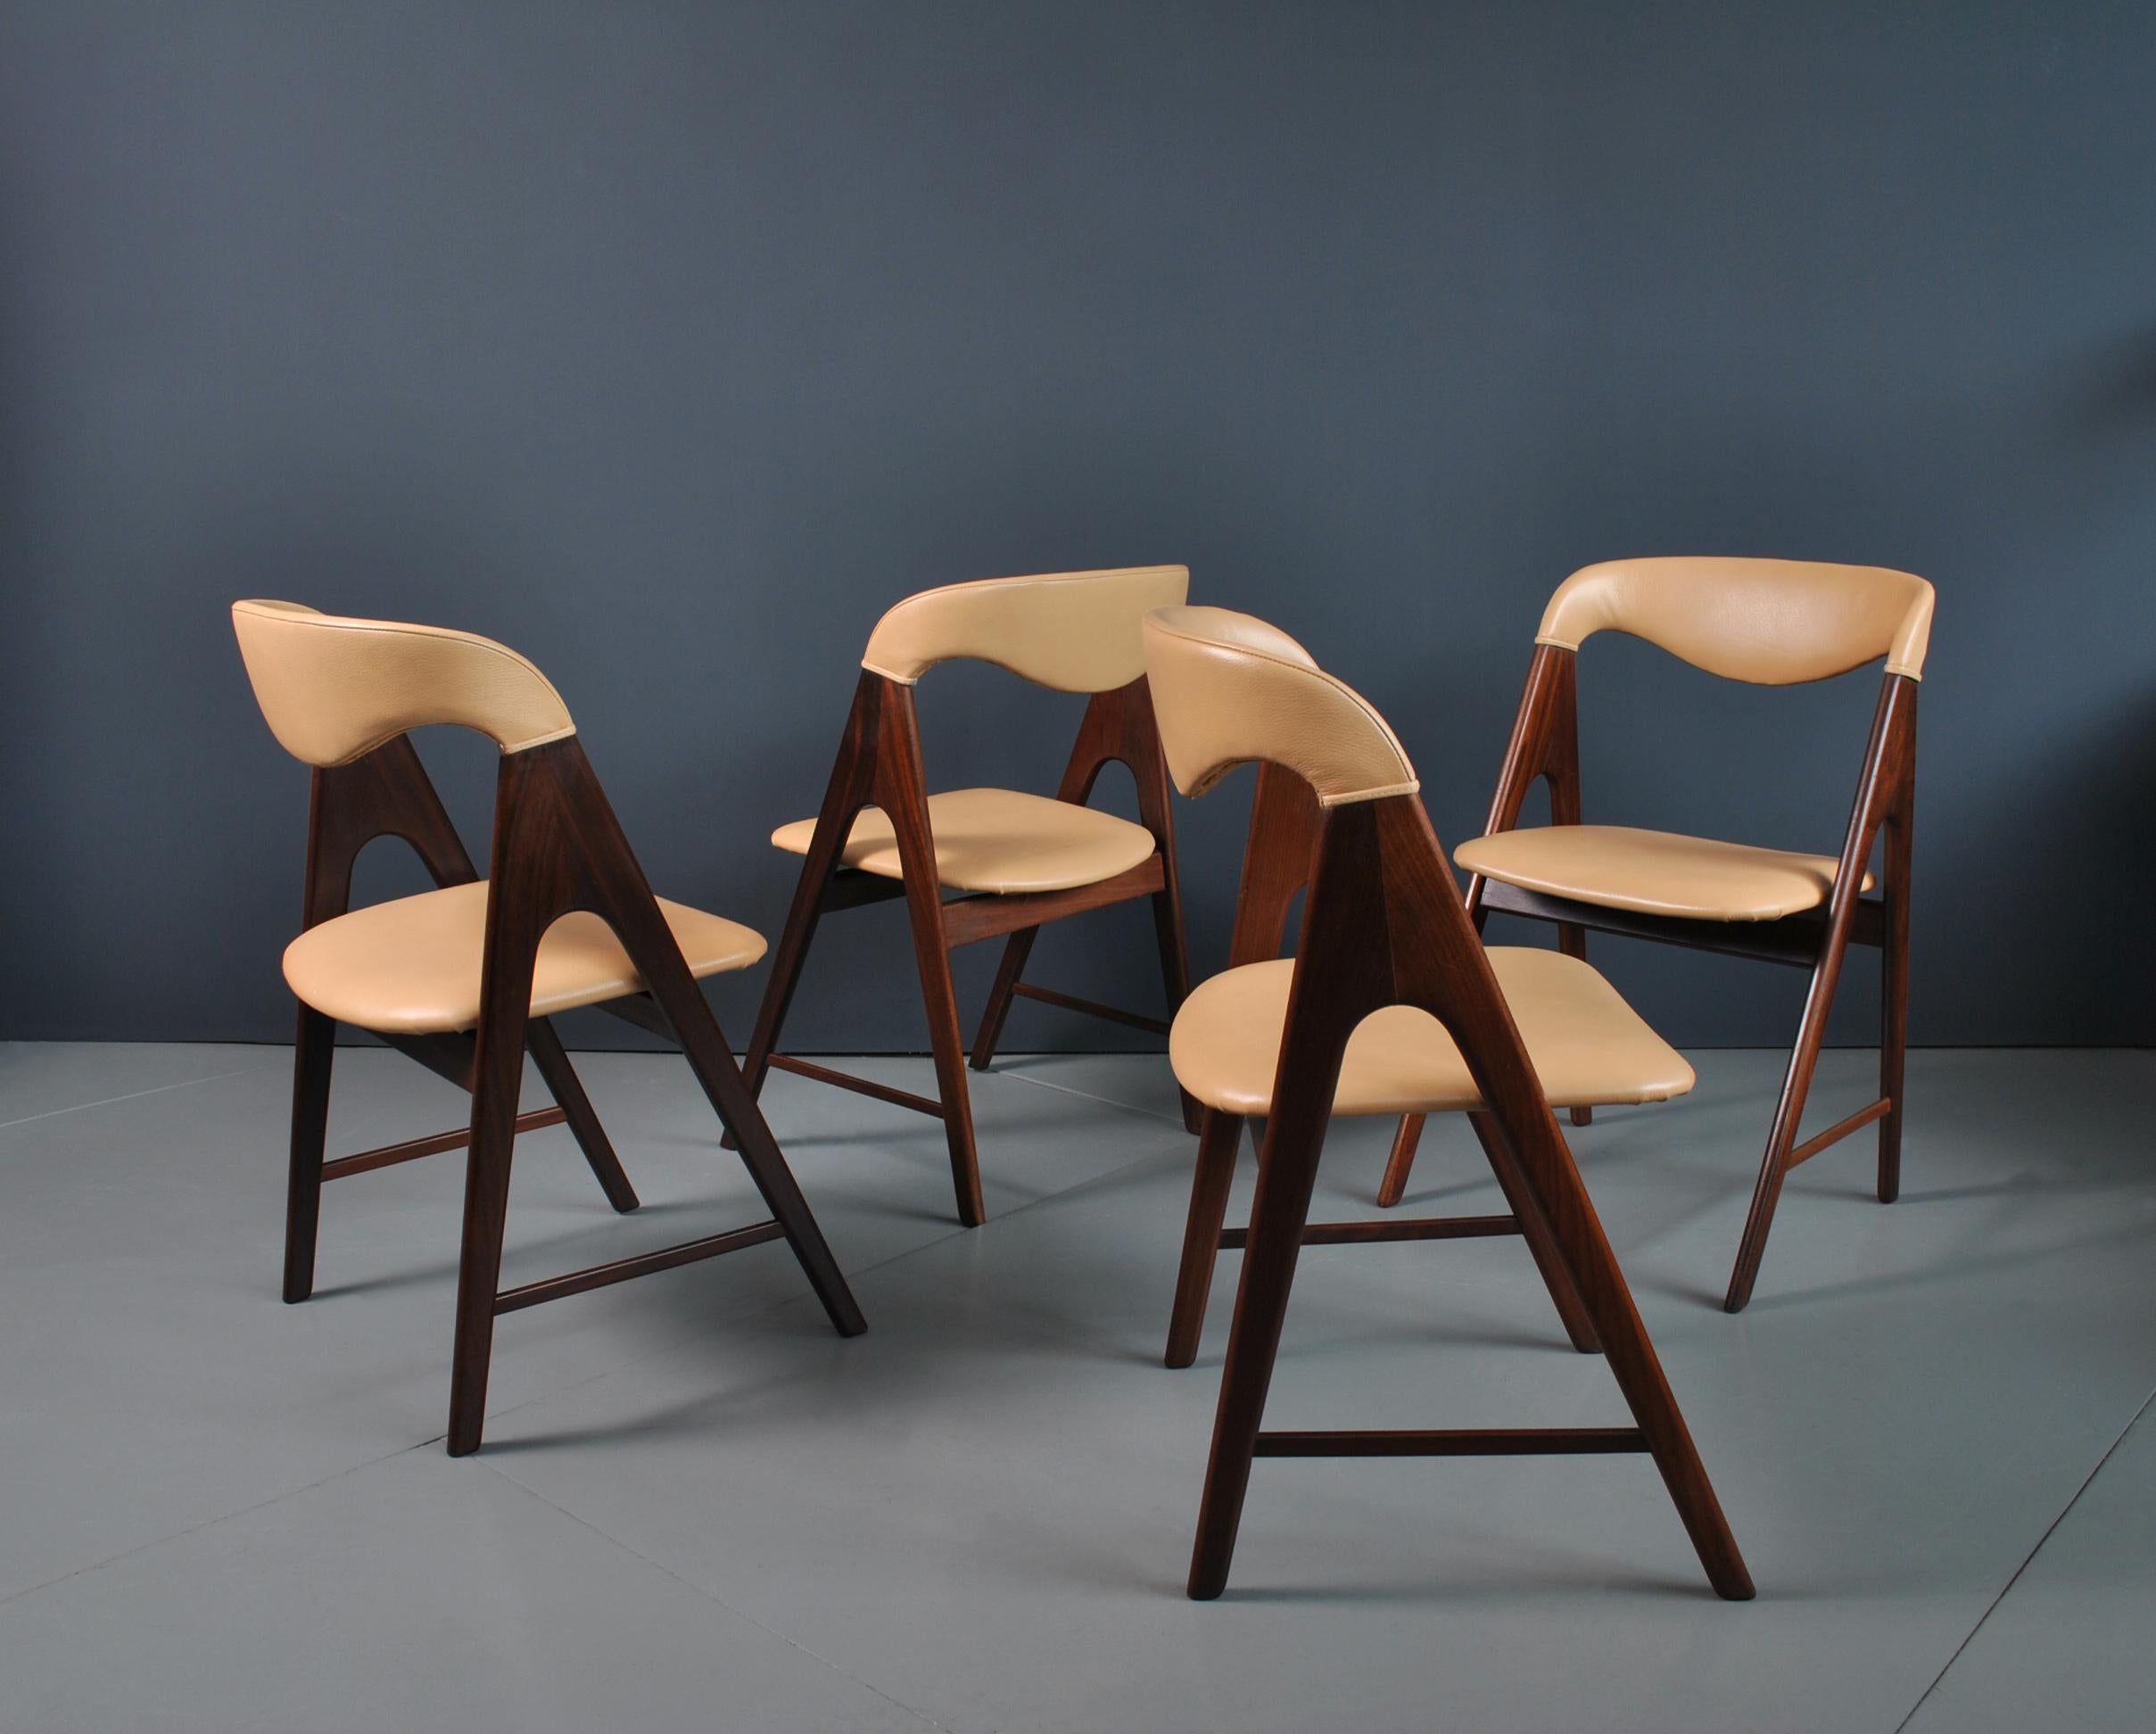 Set of 4 Danish midcentury teak dining chairs with new caramel crest leather. A very unusual walking leg design. Produced in Denmark circa 1950’s.